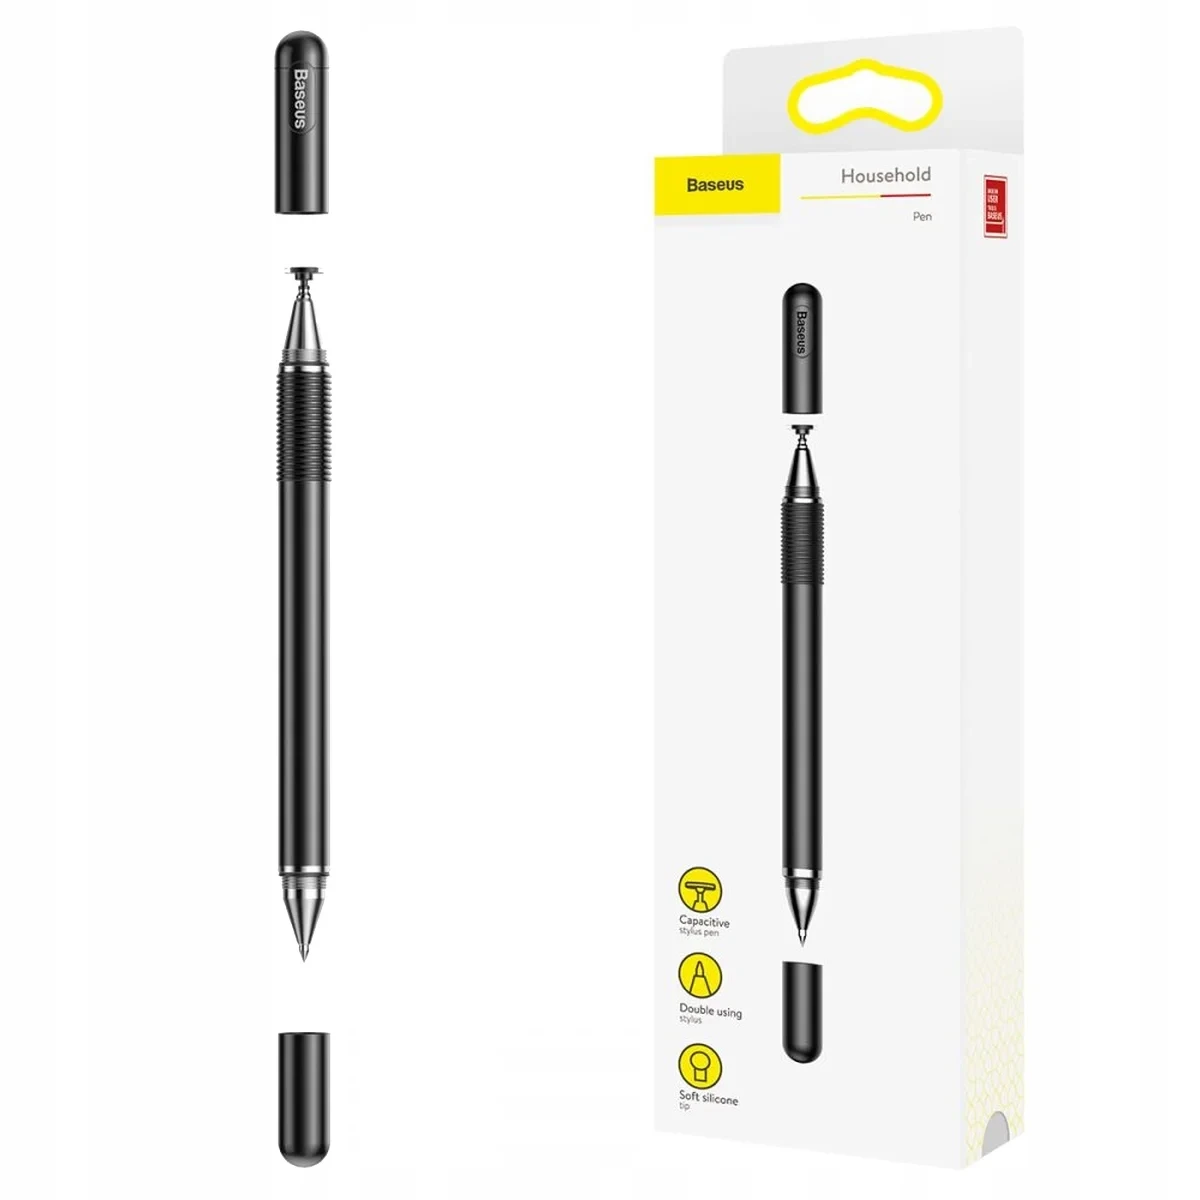 Baseus 2-in-1 Capacitive Stylus Pen for Mobile / Tablet ACPCL-01